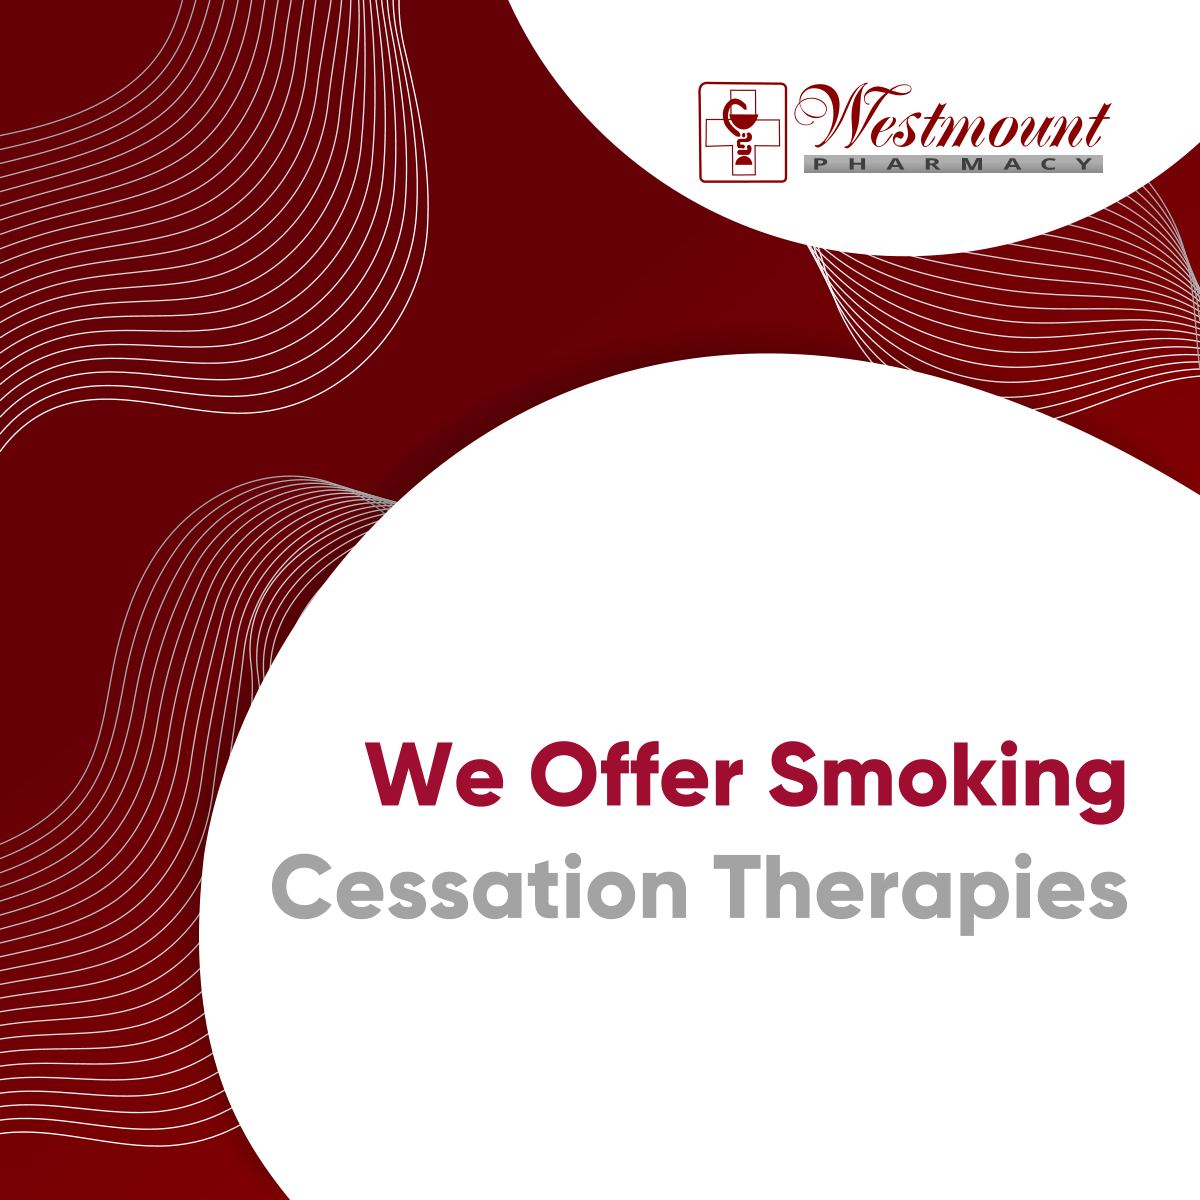 Quit smoking with our comprehensive smoking cessation therapies. Our dedicated team will provide the support and resources you need to embark on a healthier lifestyle.

#SmokingCessation #PharmacyServices #WestHamiltonON